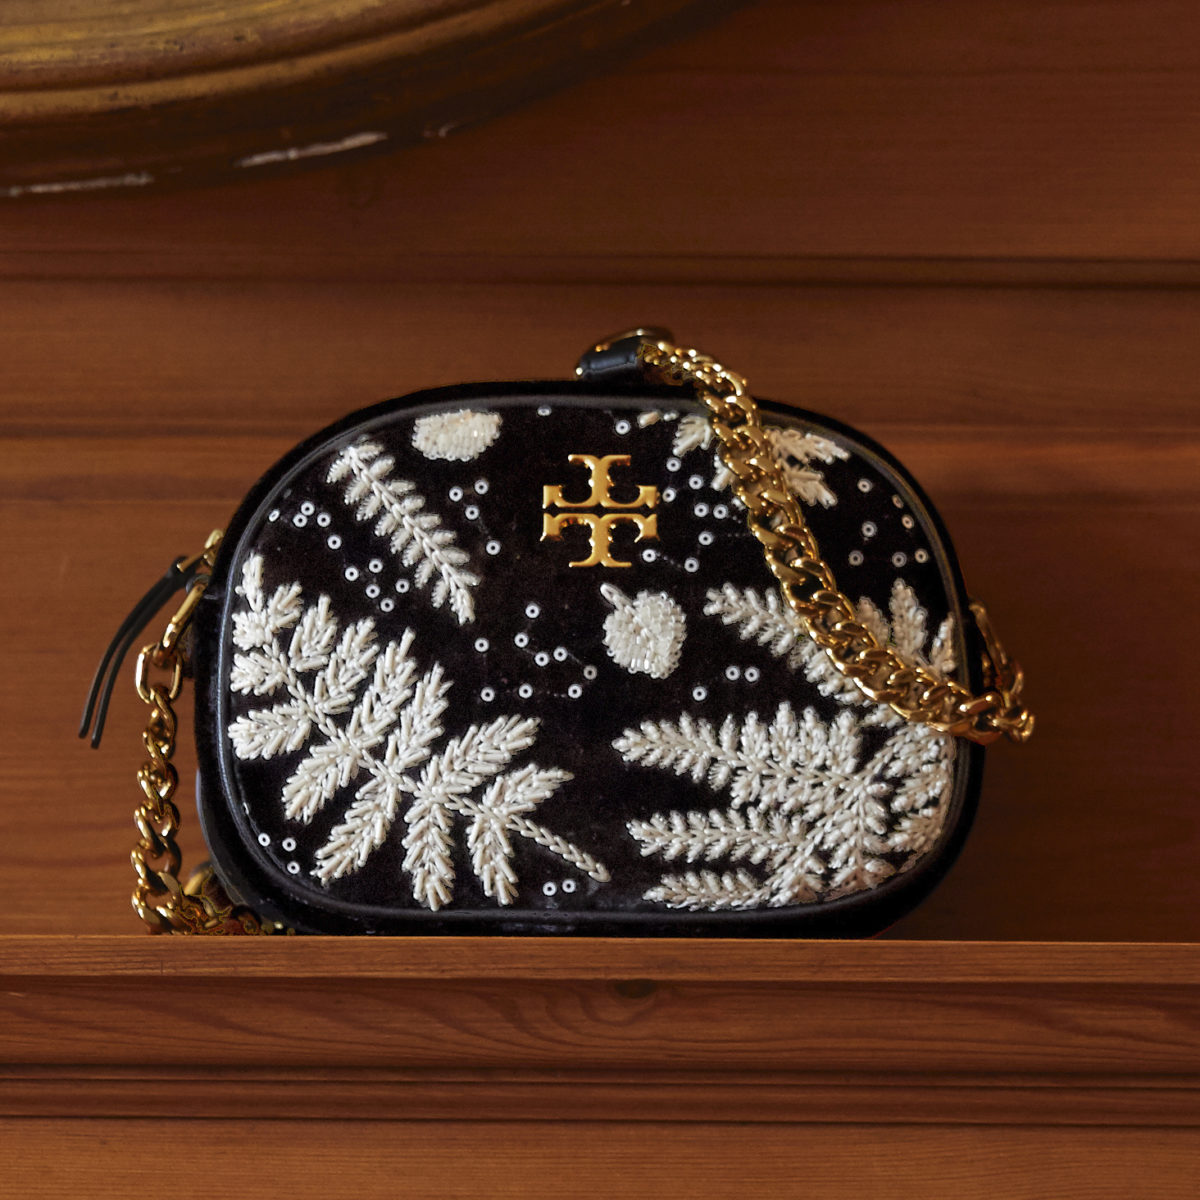 Tory Burch Holiday Sale | Georgetown DC - Explore Georgetown in Washington,  DC